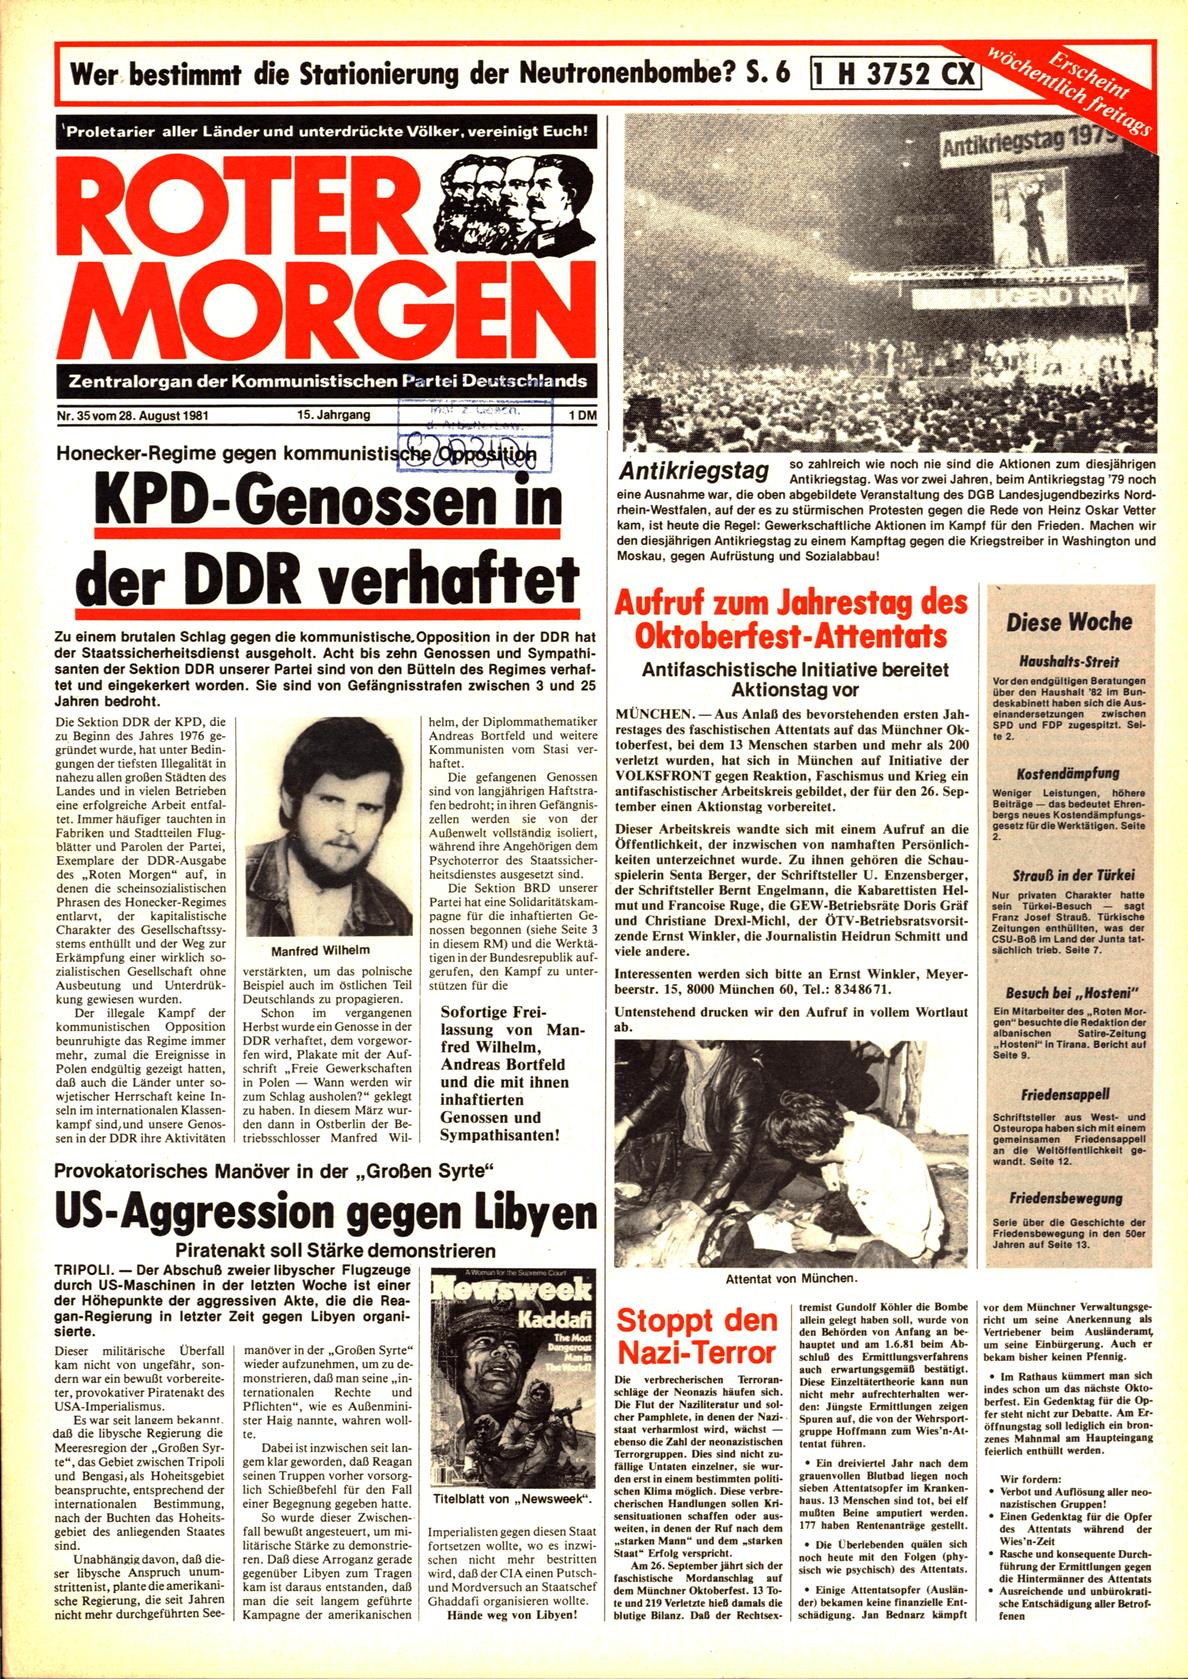 Roter Morgen, 15. Jg., 28. August 1981, Nr. 35, Seite 1